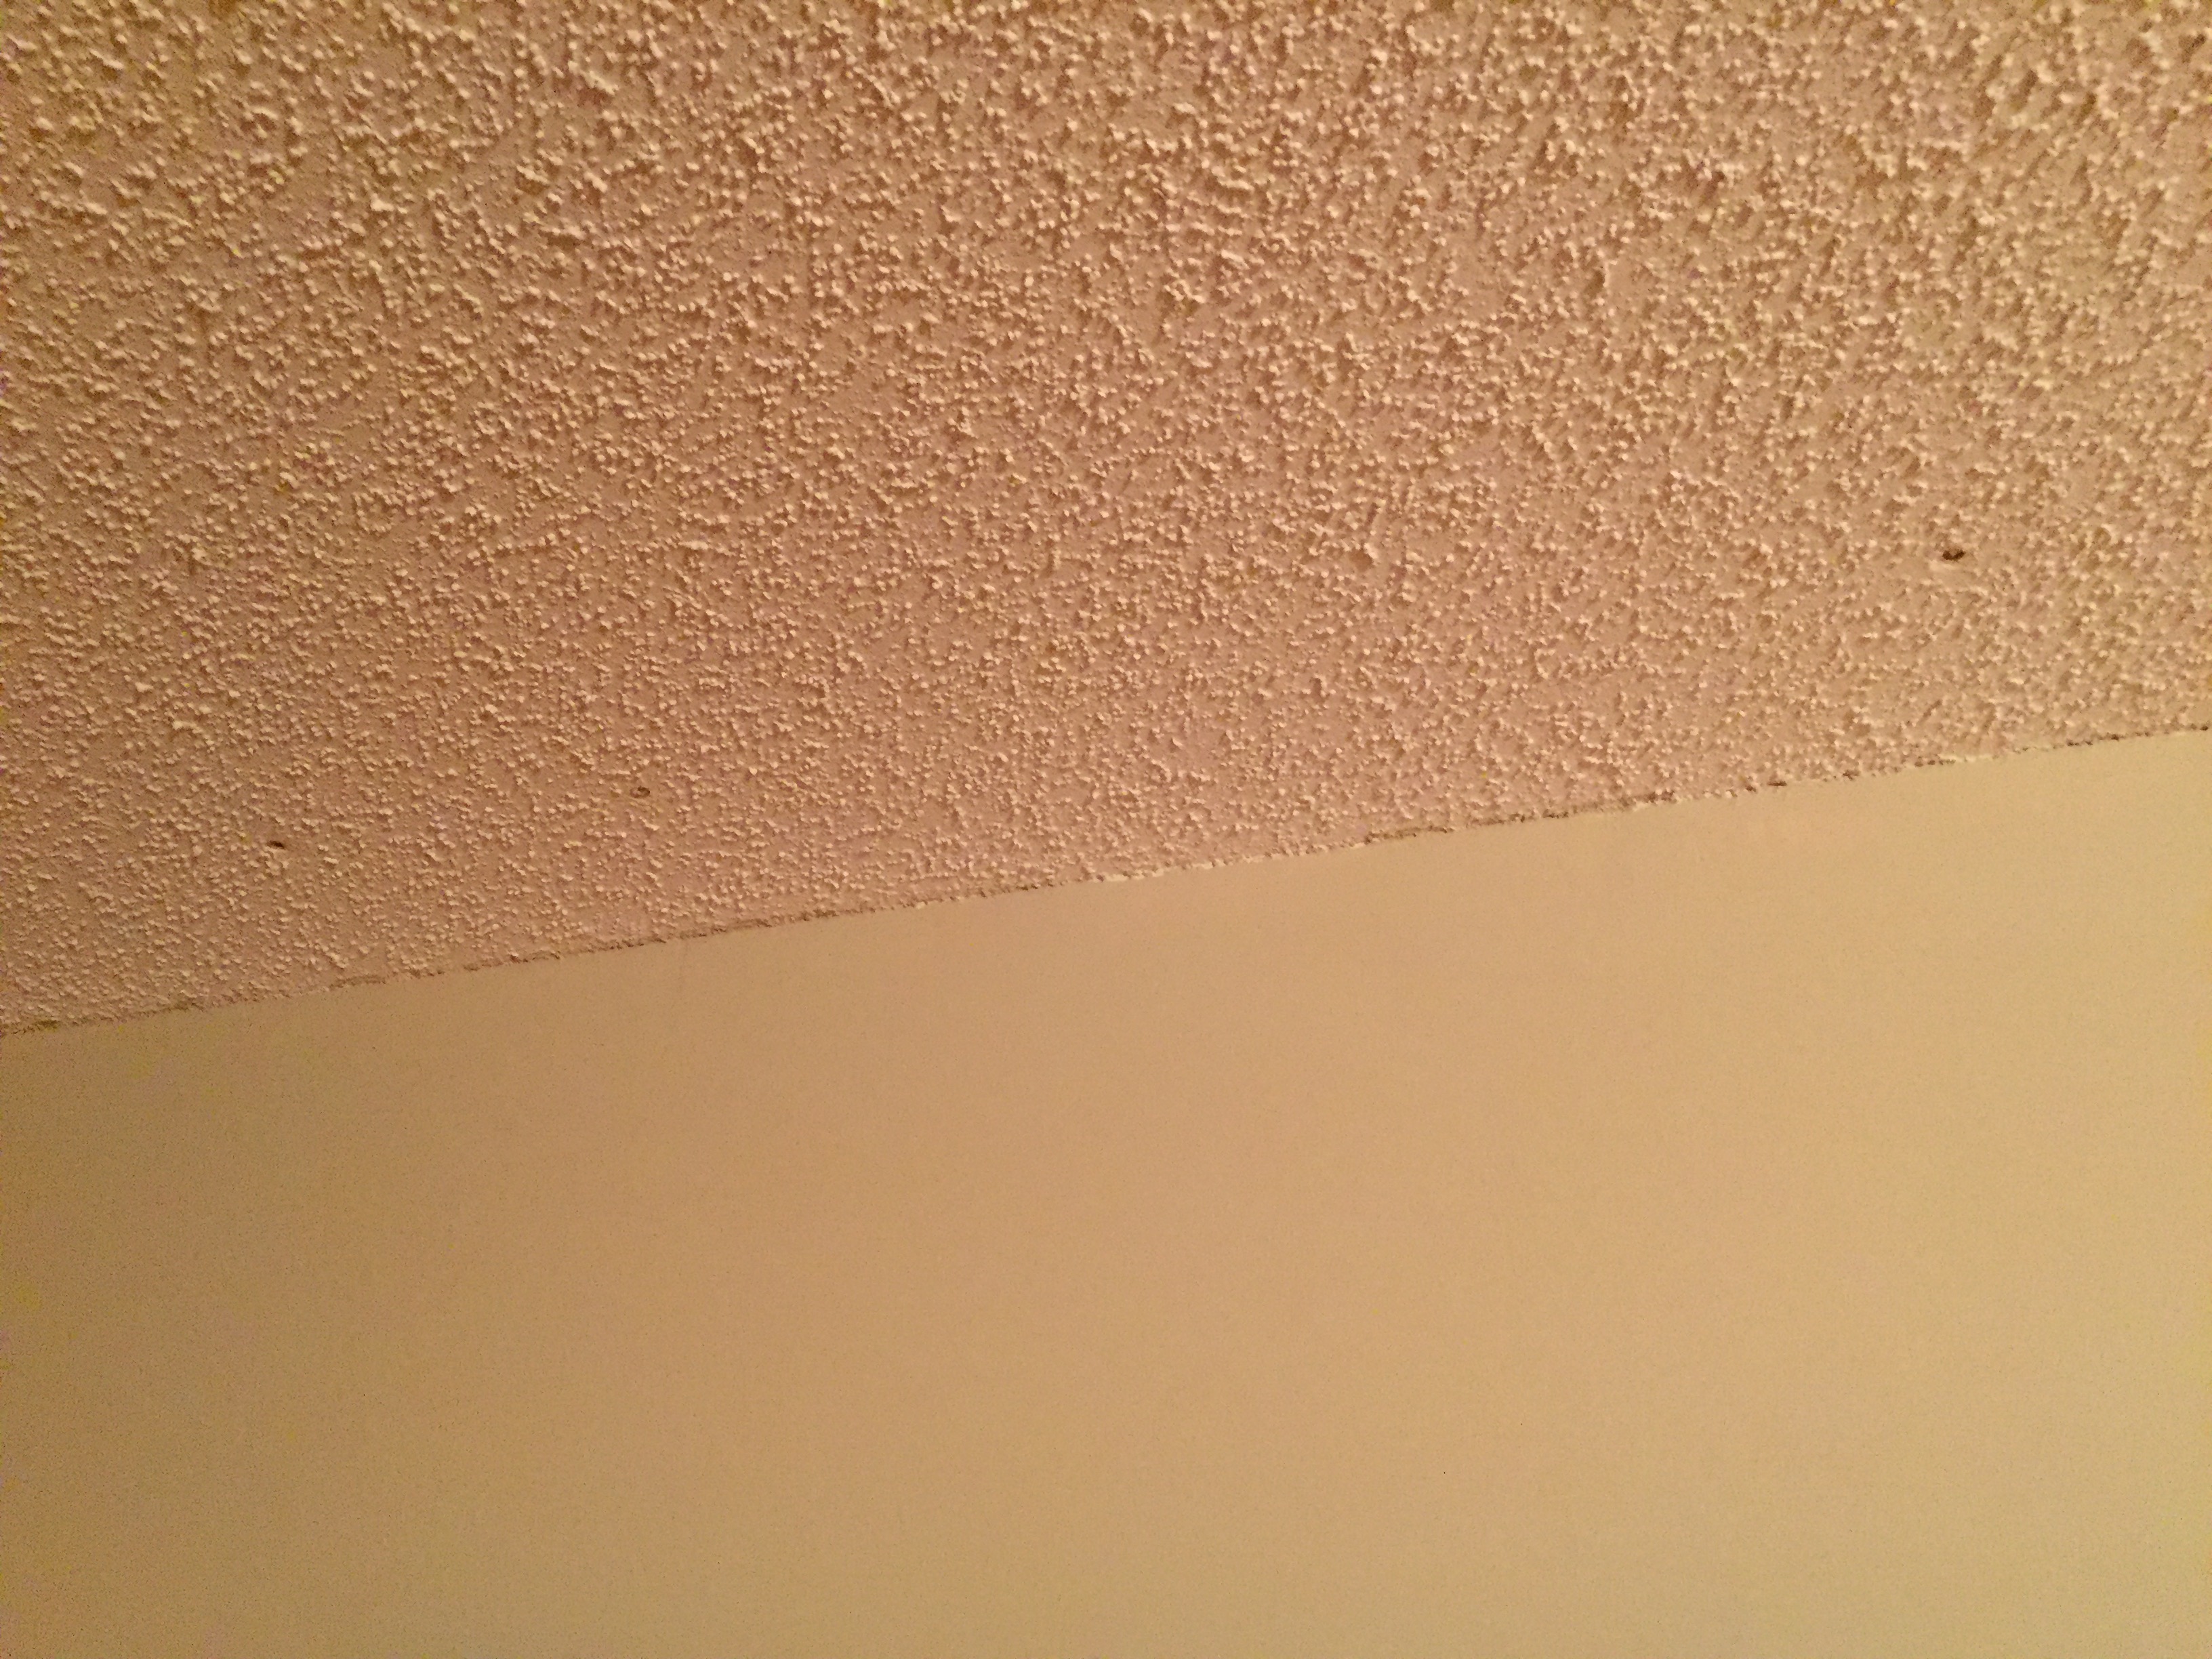 Nails popping out of living room ceiling